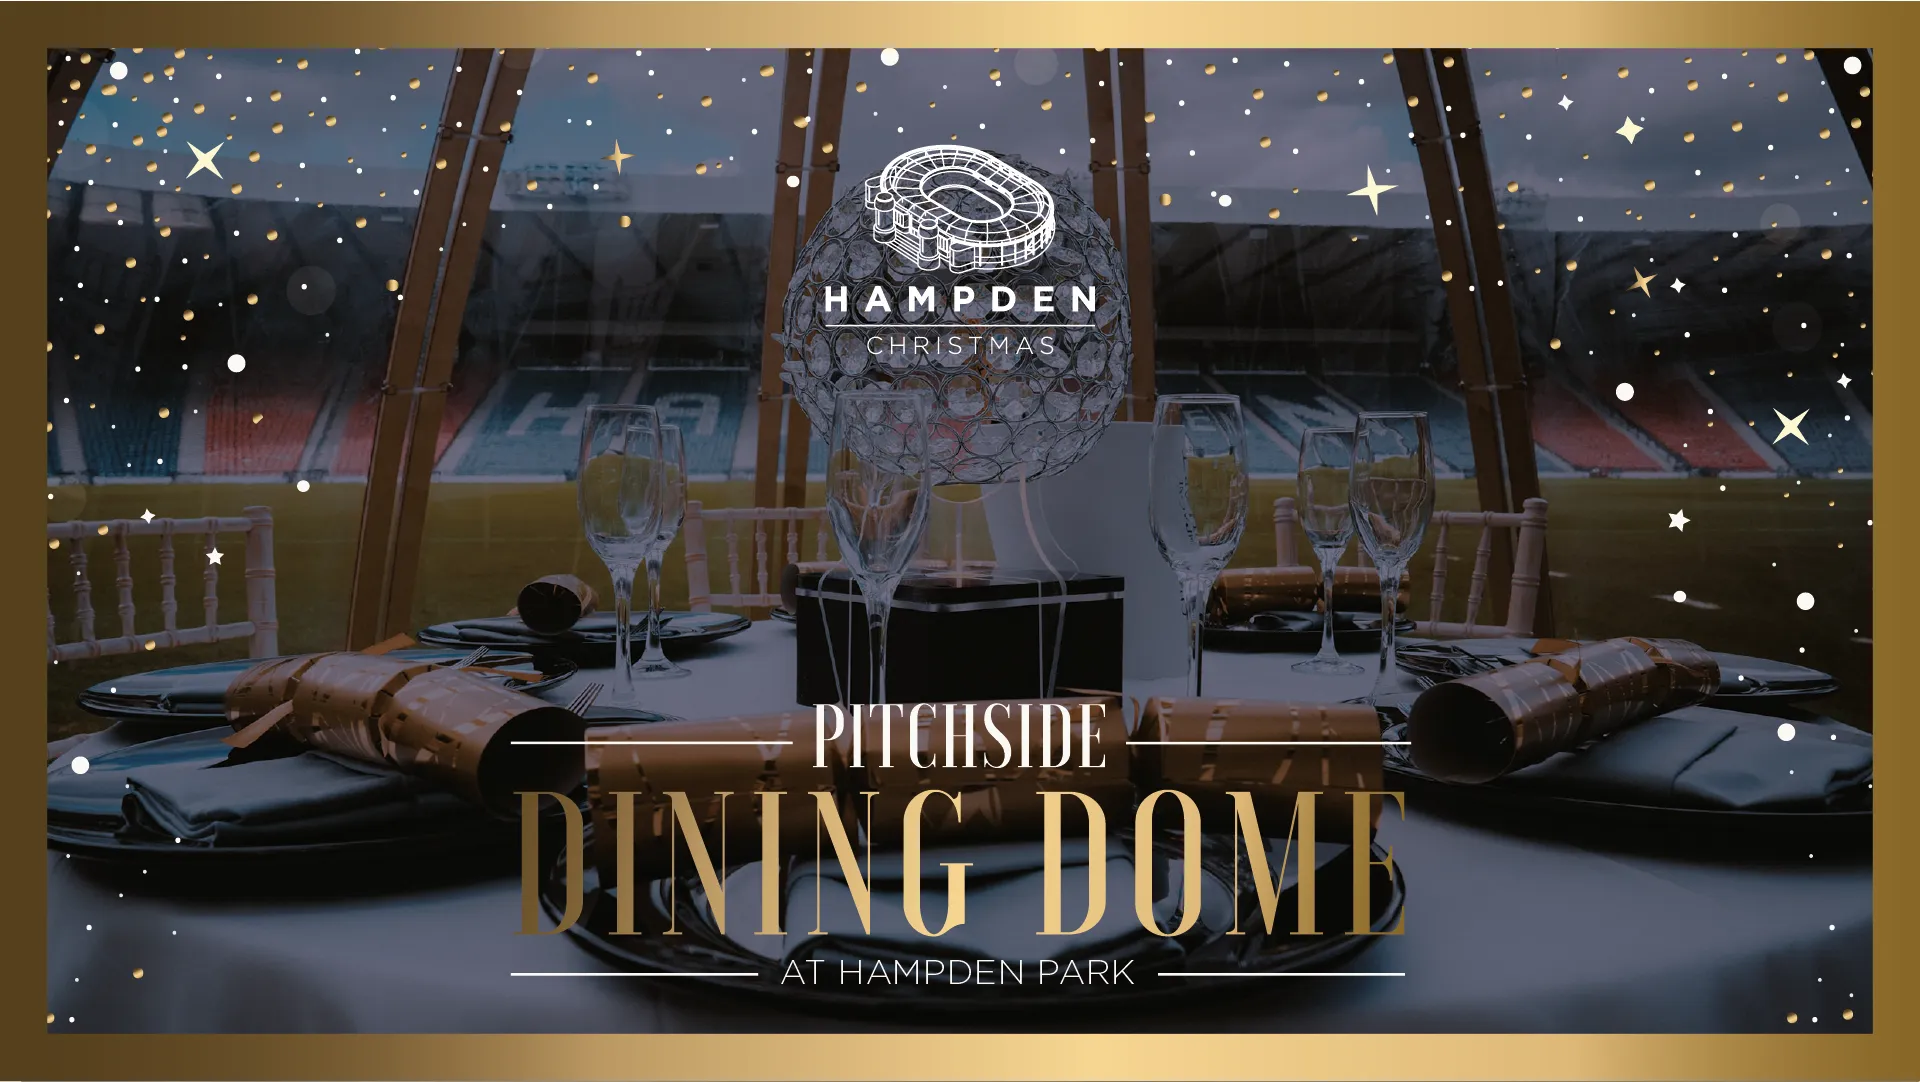 PITCHSIDE DINING DOME